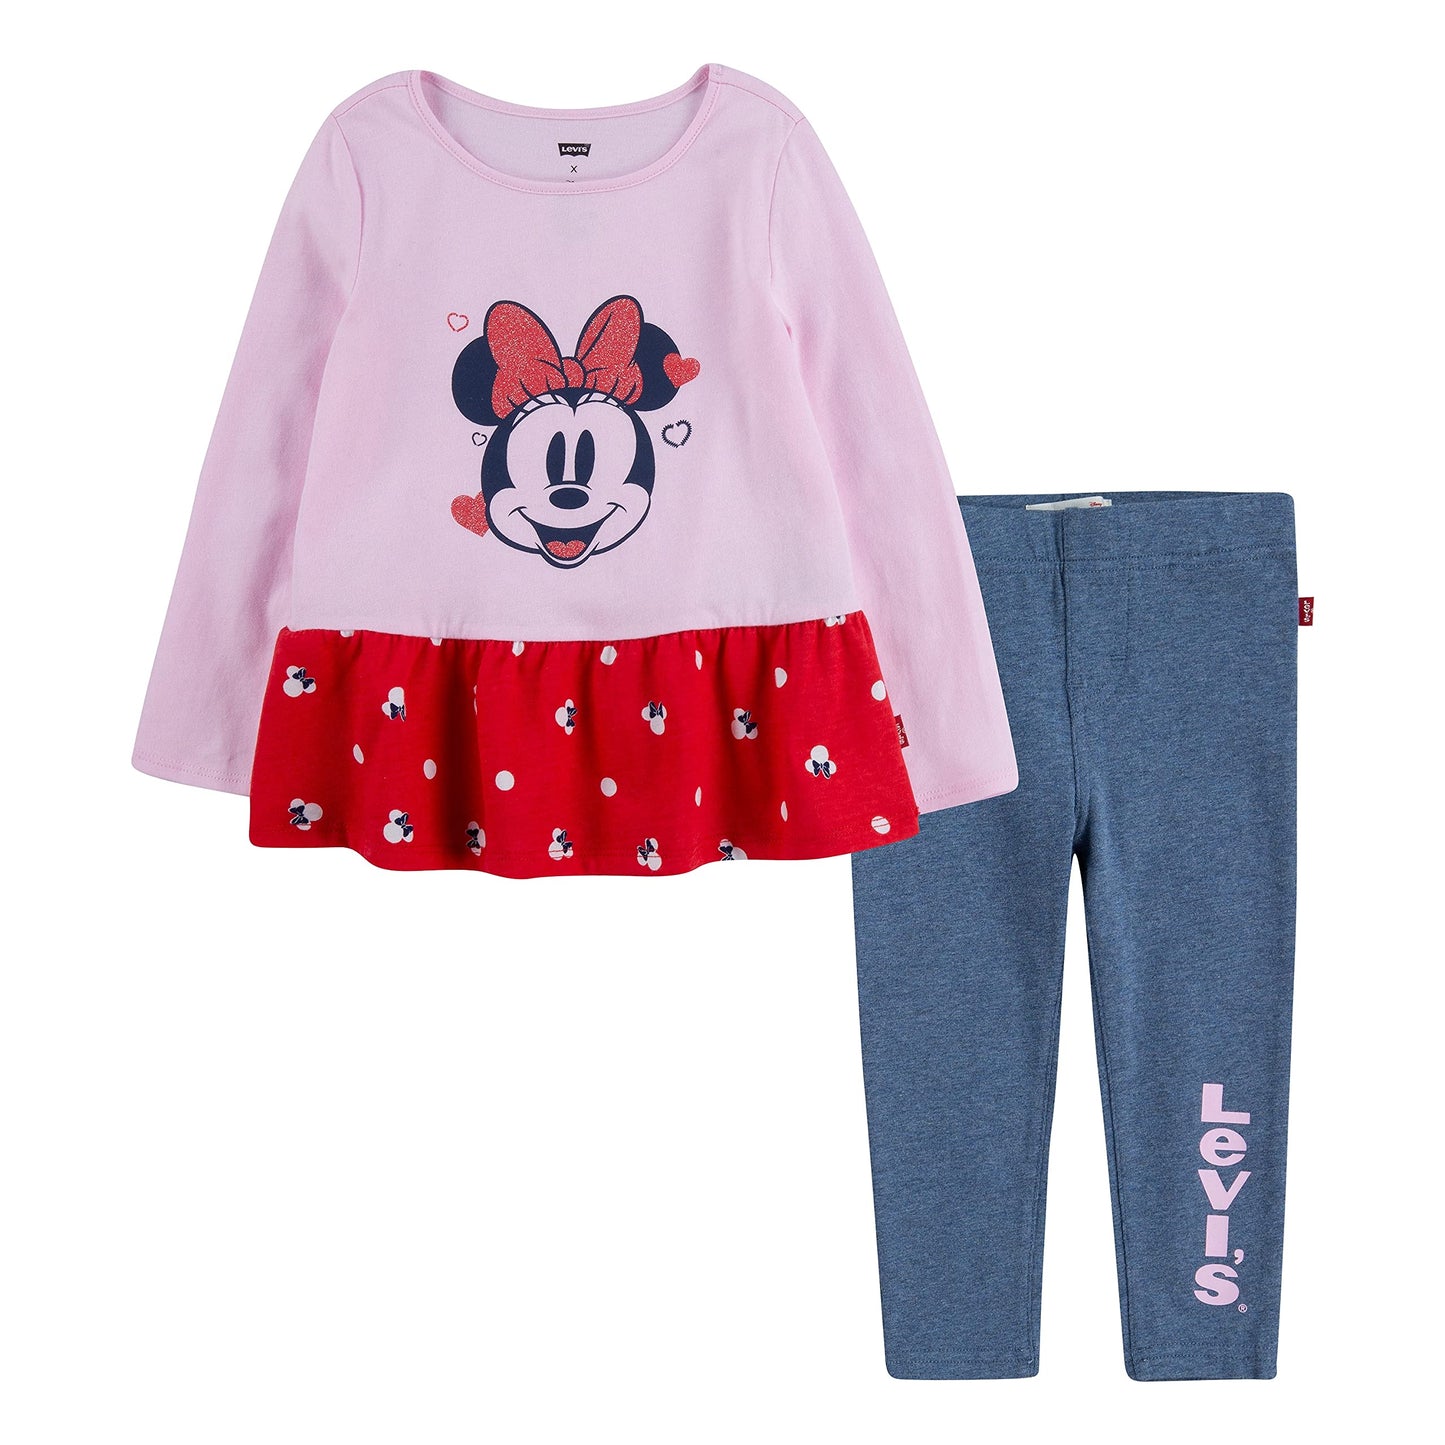 Image 1 of Levi's x Disney Minnie Mouse T-Shirt and Leggings Set (Toddler)